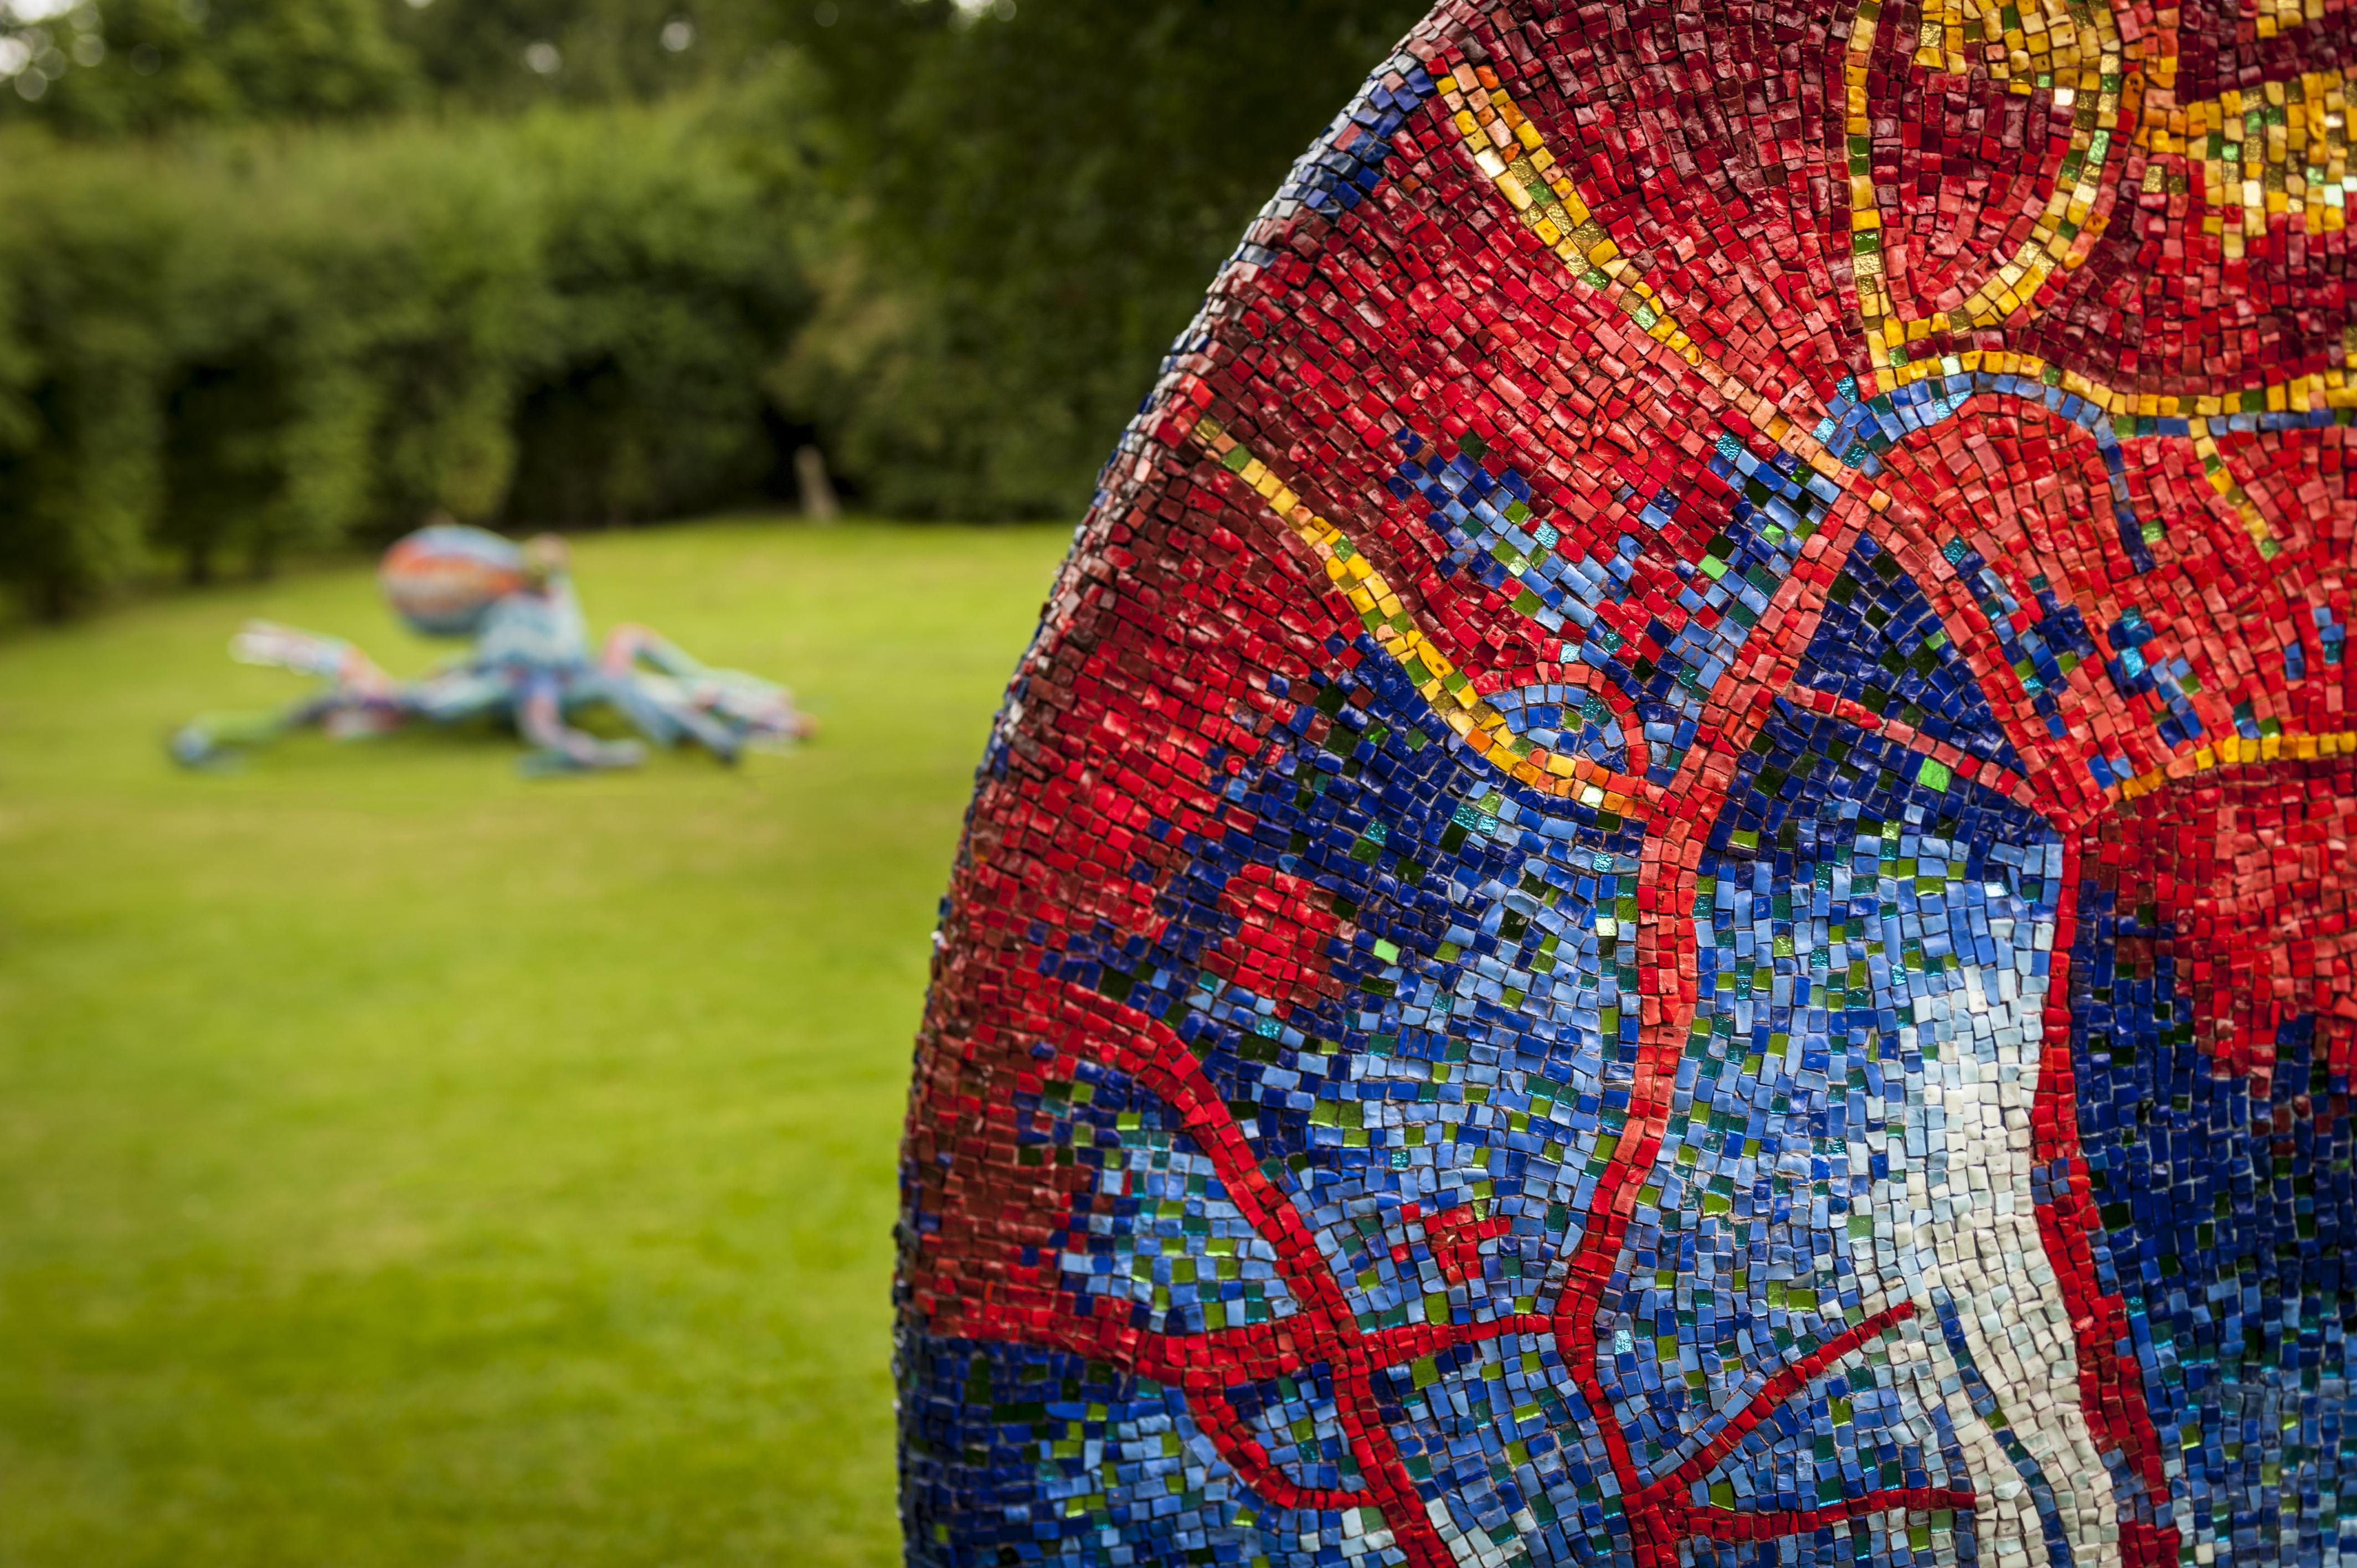 A close up of a red and blue mosaic sculpture